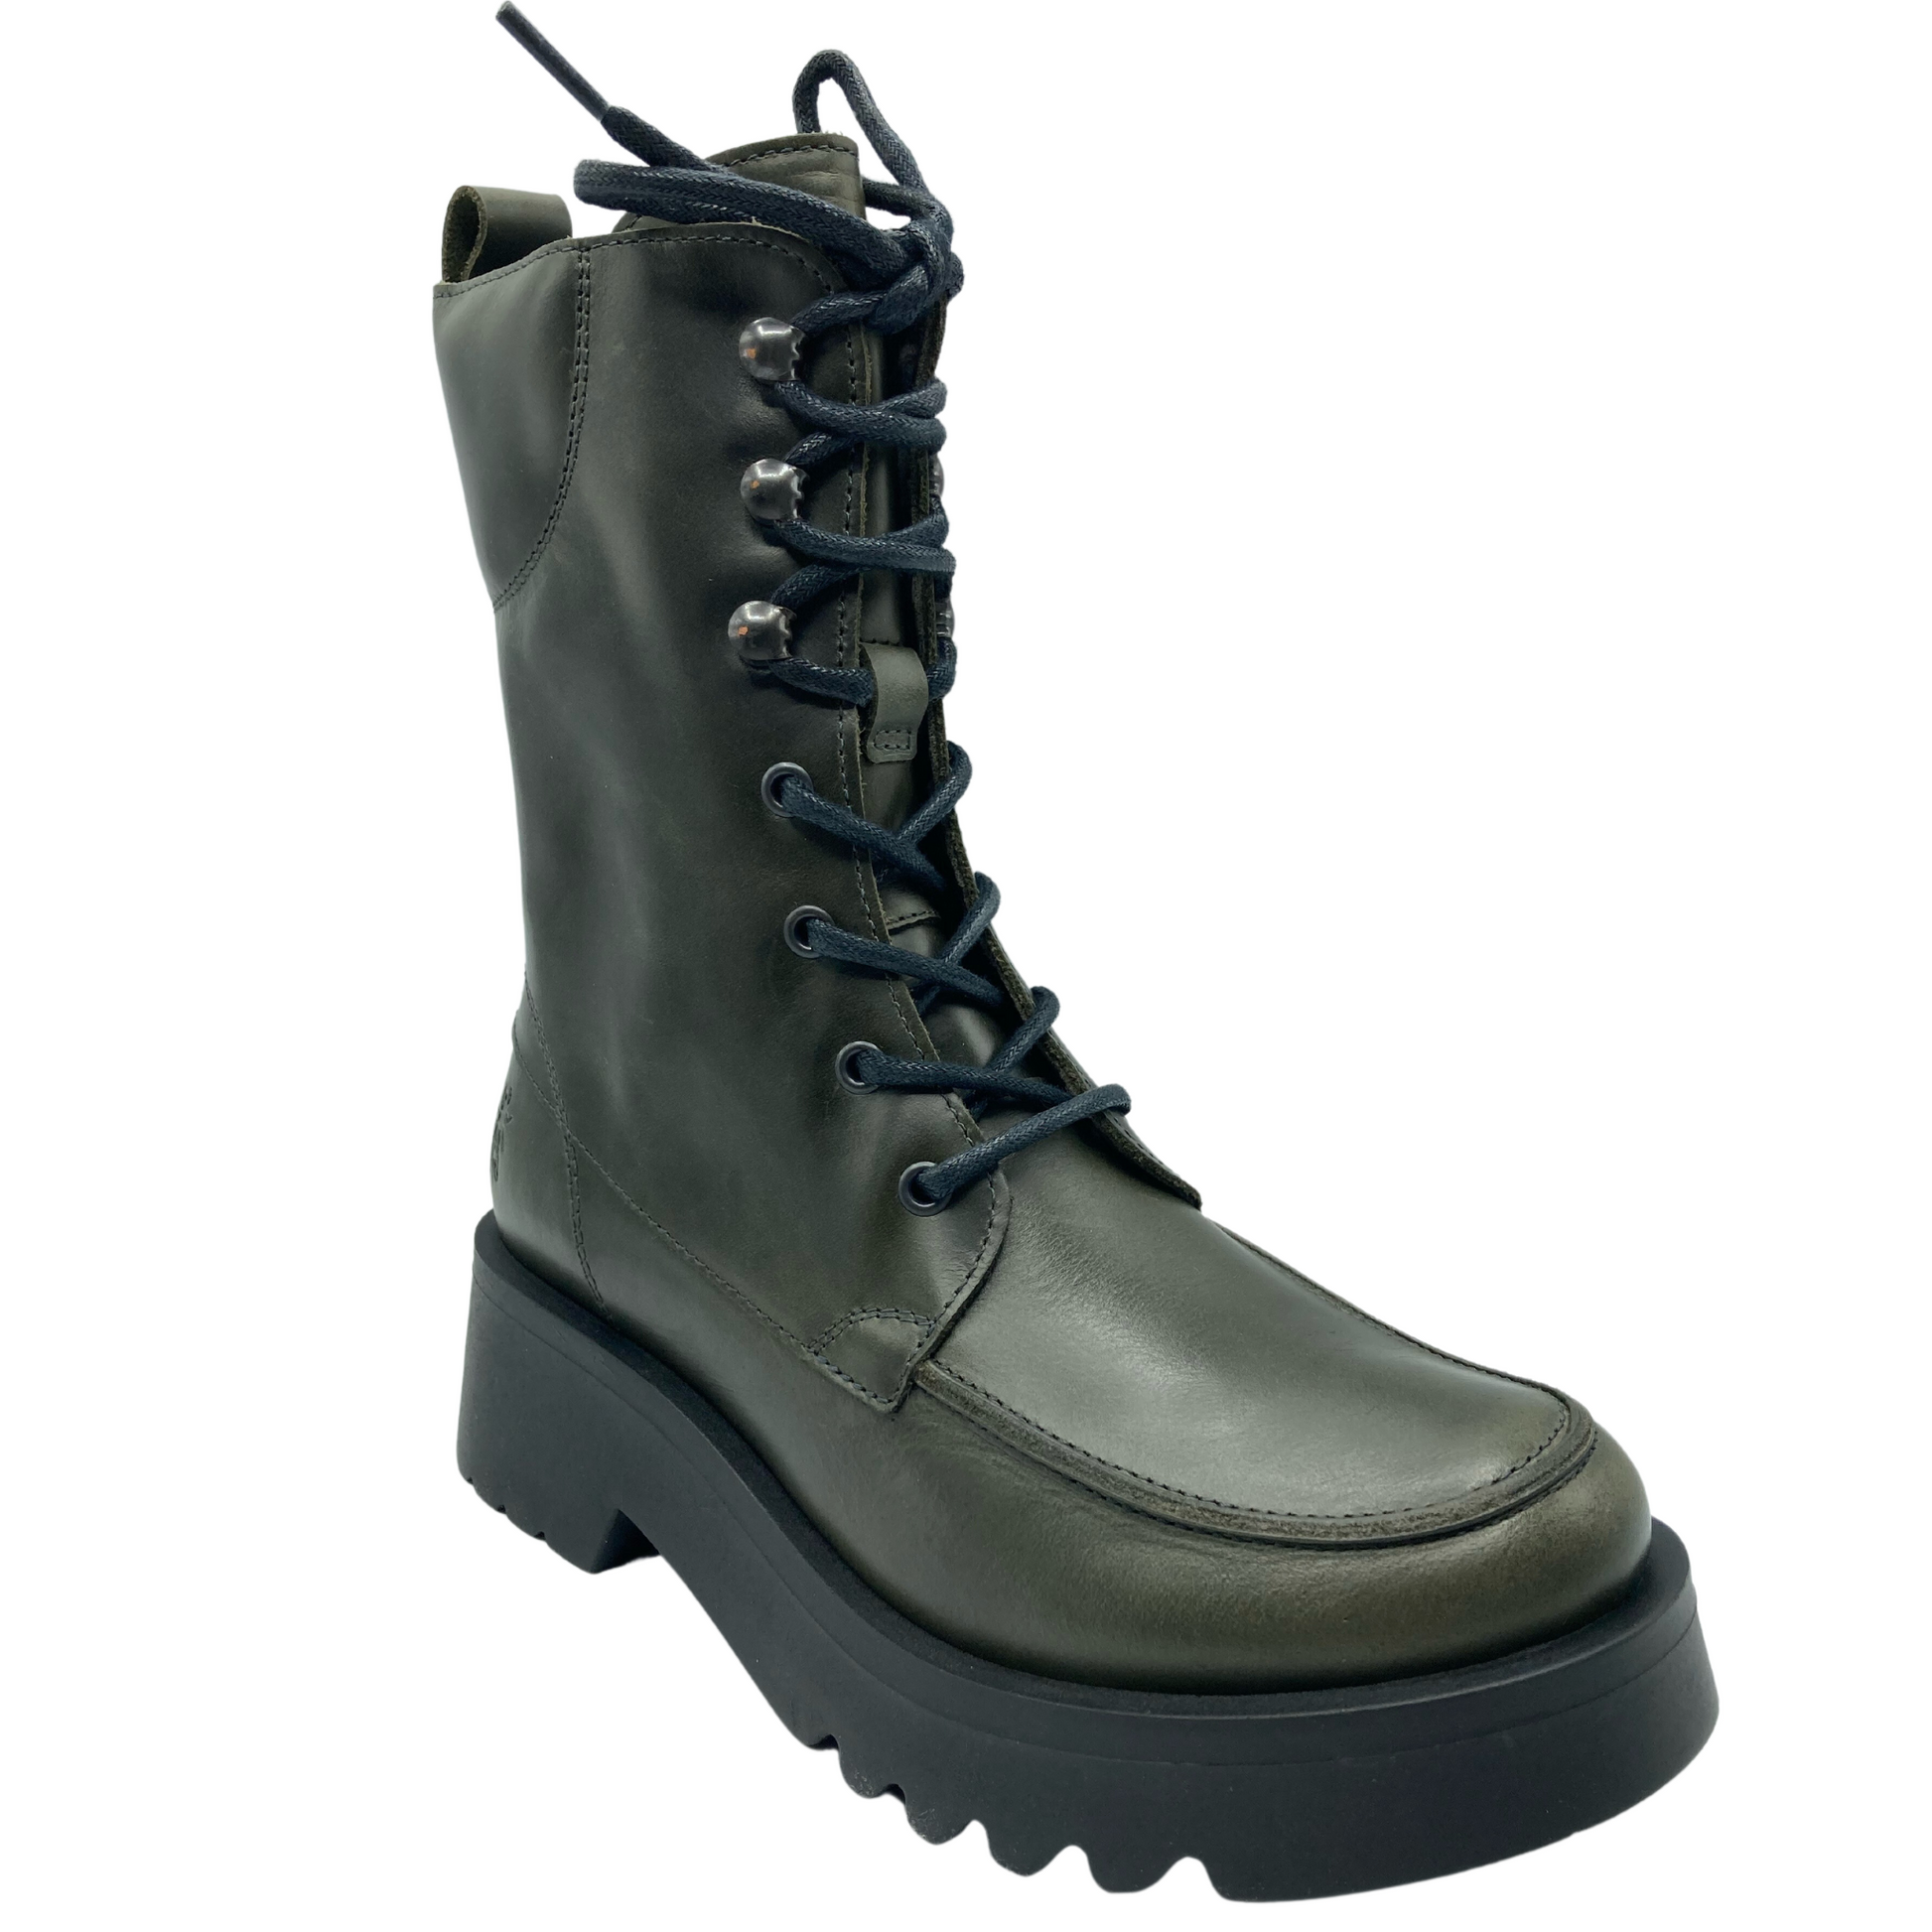 45 degree angled view of dark green leather, over-the-ankle boot with laces and rubber sole